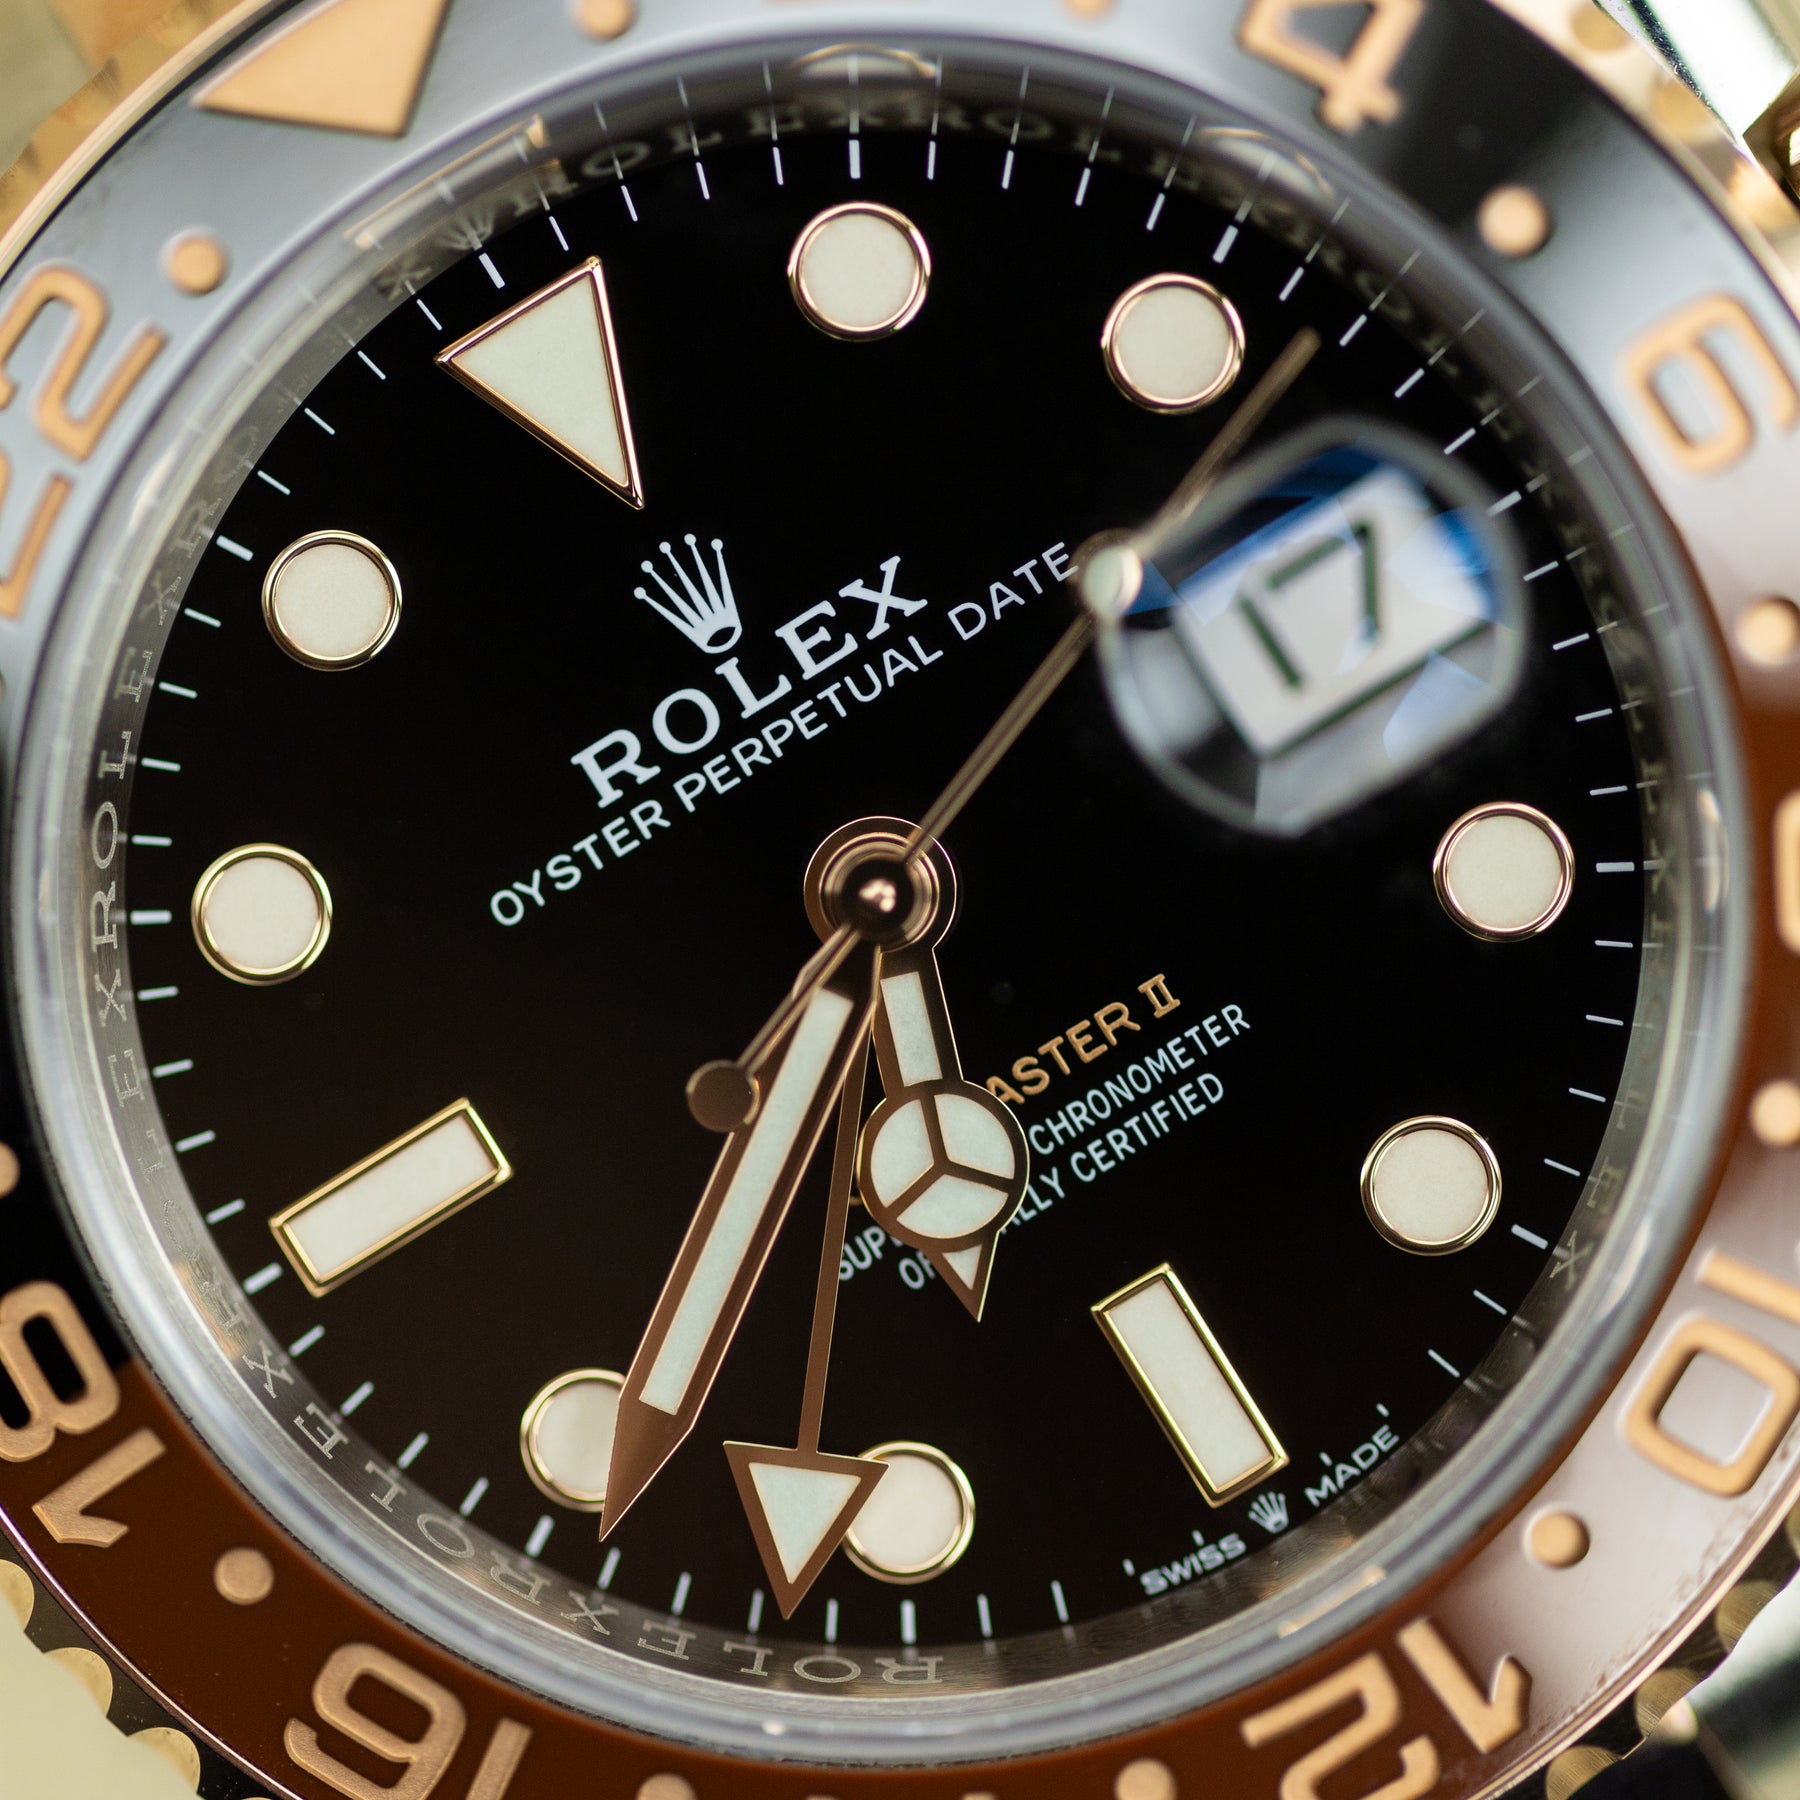 2020 Rolex GMT-MASTER II 'Root Beer' Oyster, 41mm, Oystersteel & Everose Gold available at RR Jewellers Yarm